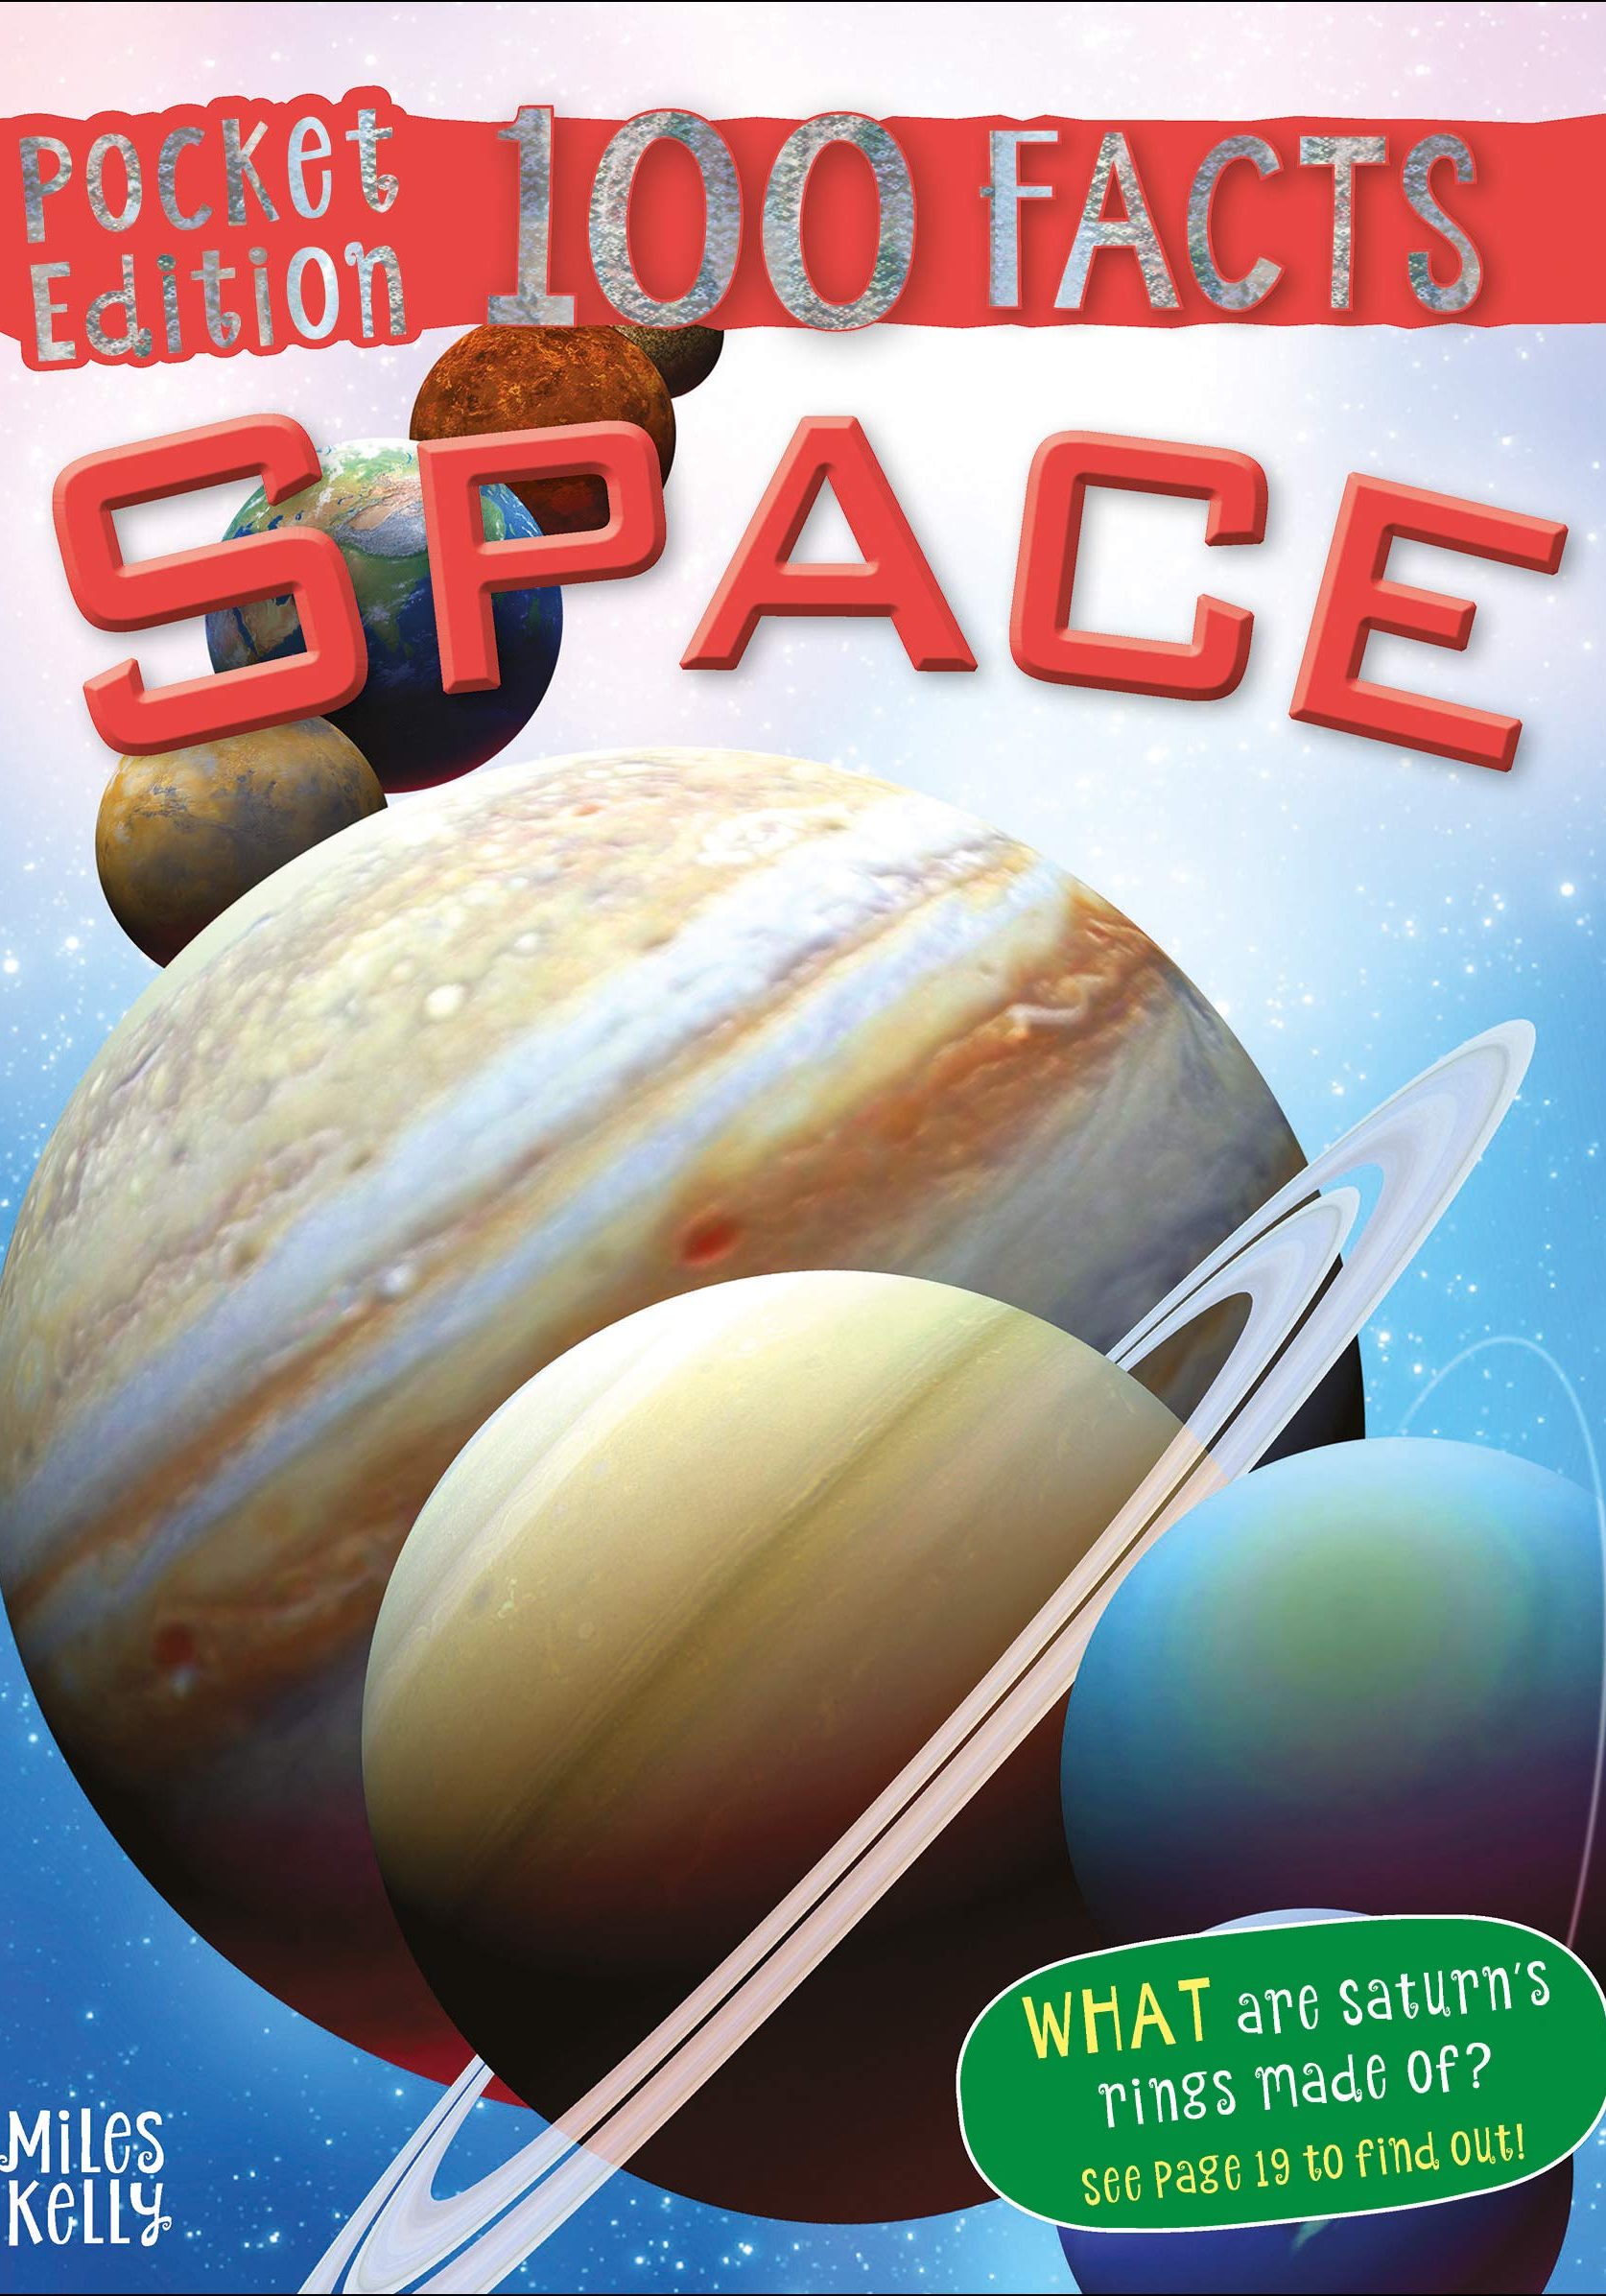 100 FACTS SPACES POCKET EDITION